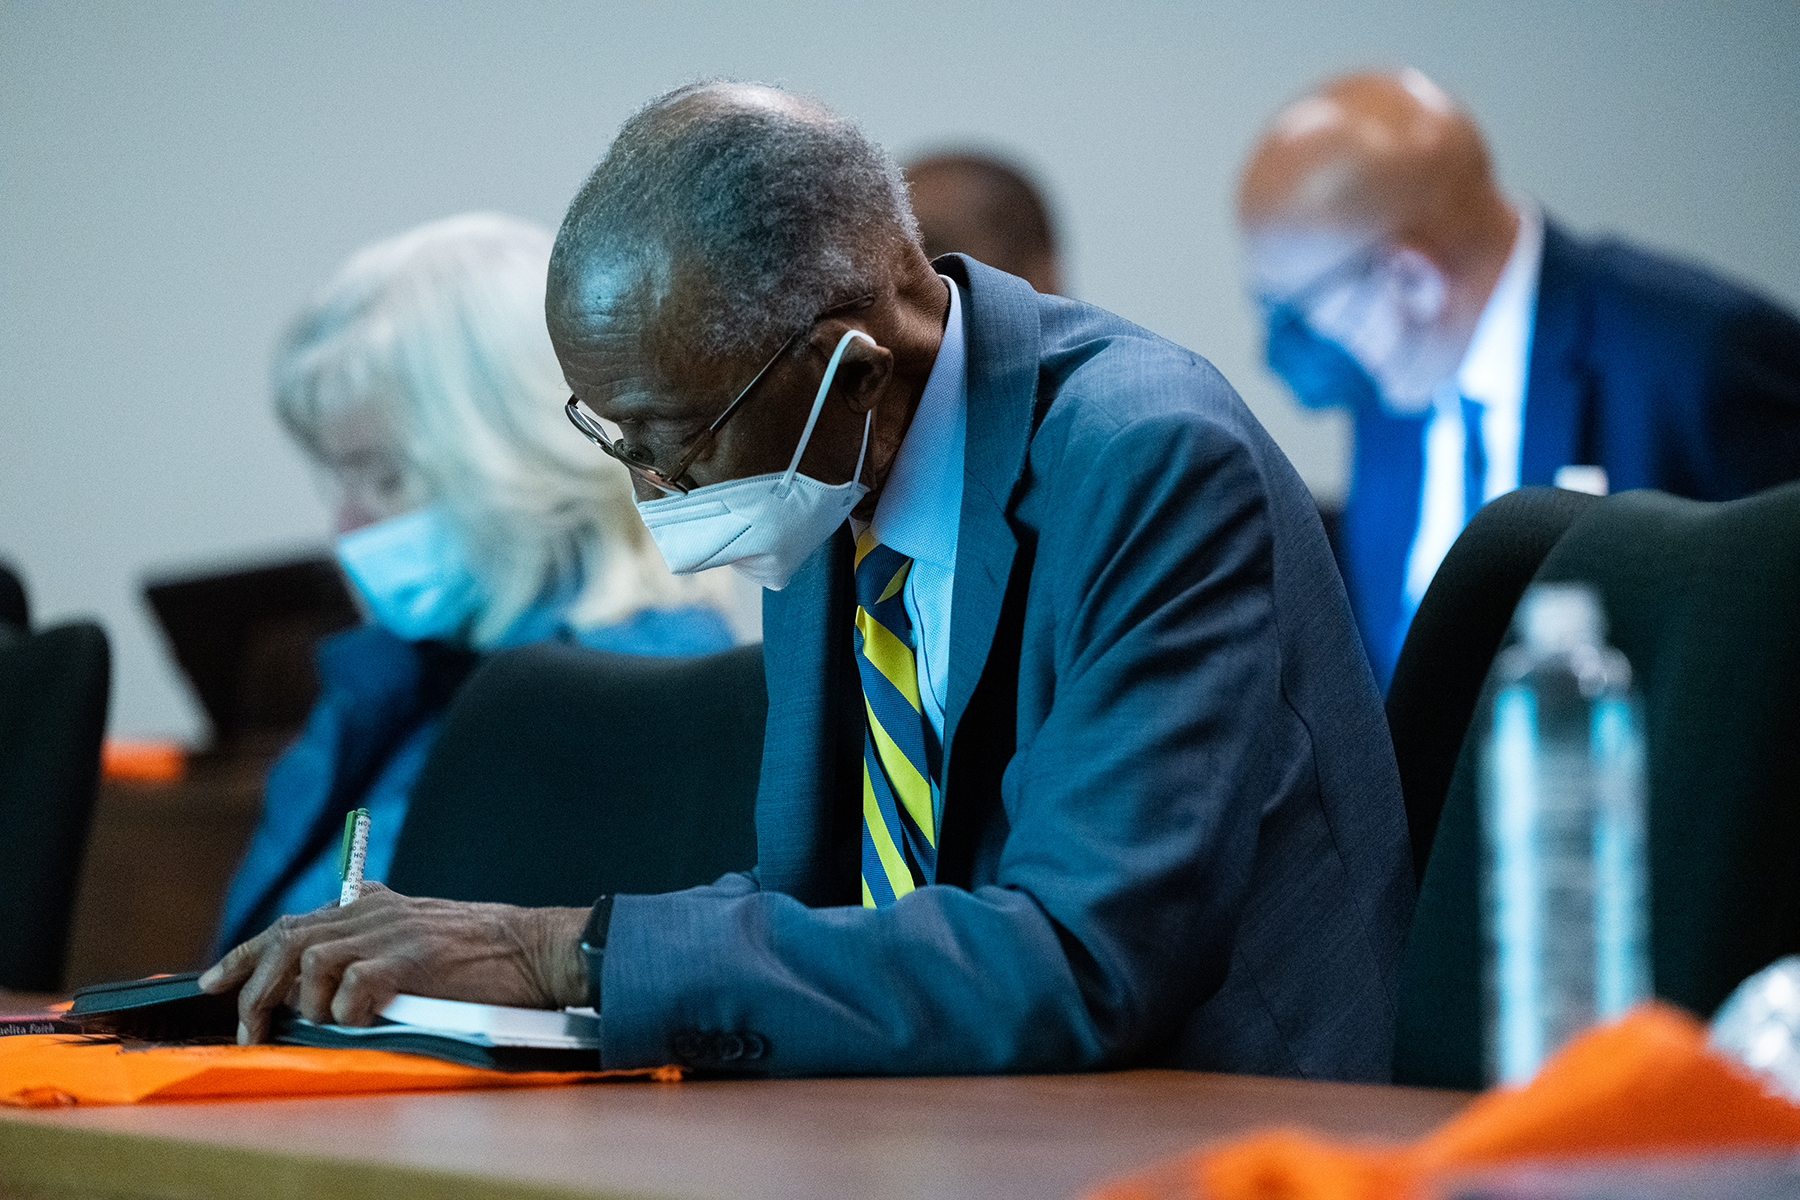 Pastor Ralph Peay, minister and Civil Rights activist since the late 1950s, was a participant and speaker at the North American Division's (NAD's) counternarrative writing conference, part of the NAD's Adventist Ministries Convention, held January 9 & 10, 2023.